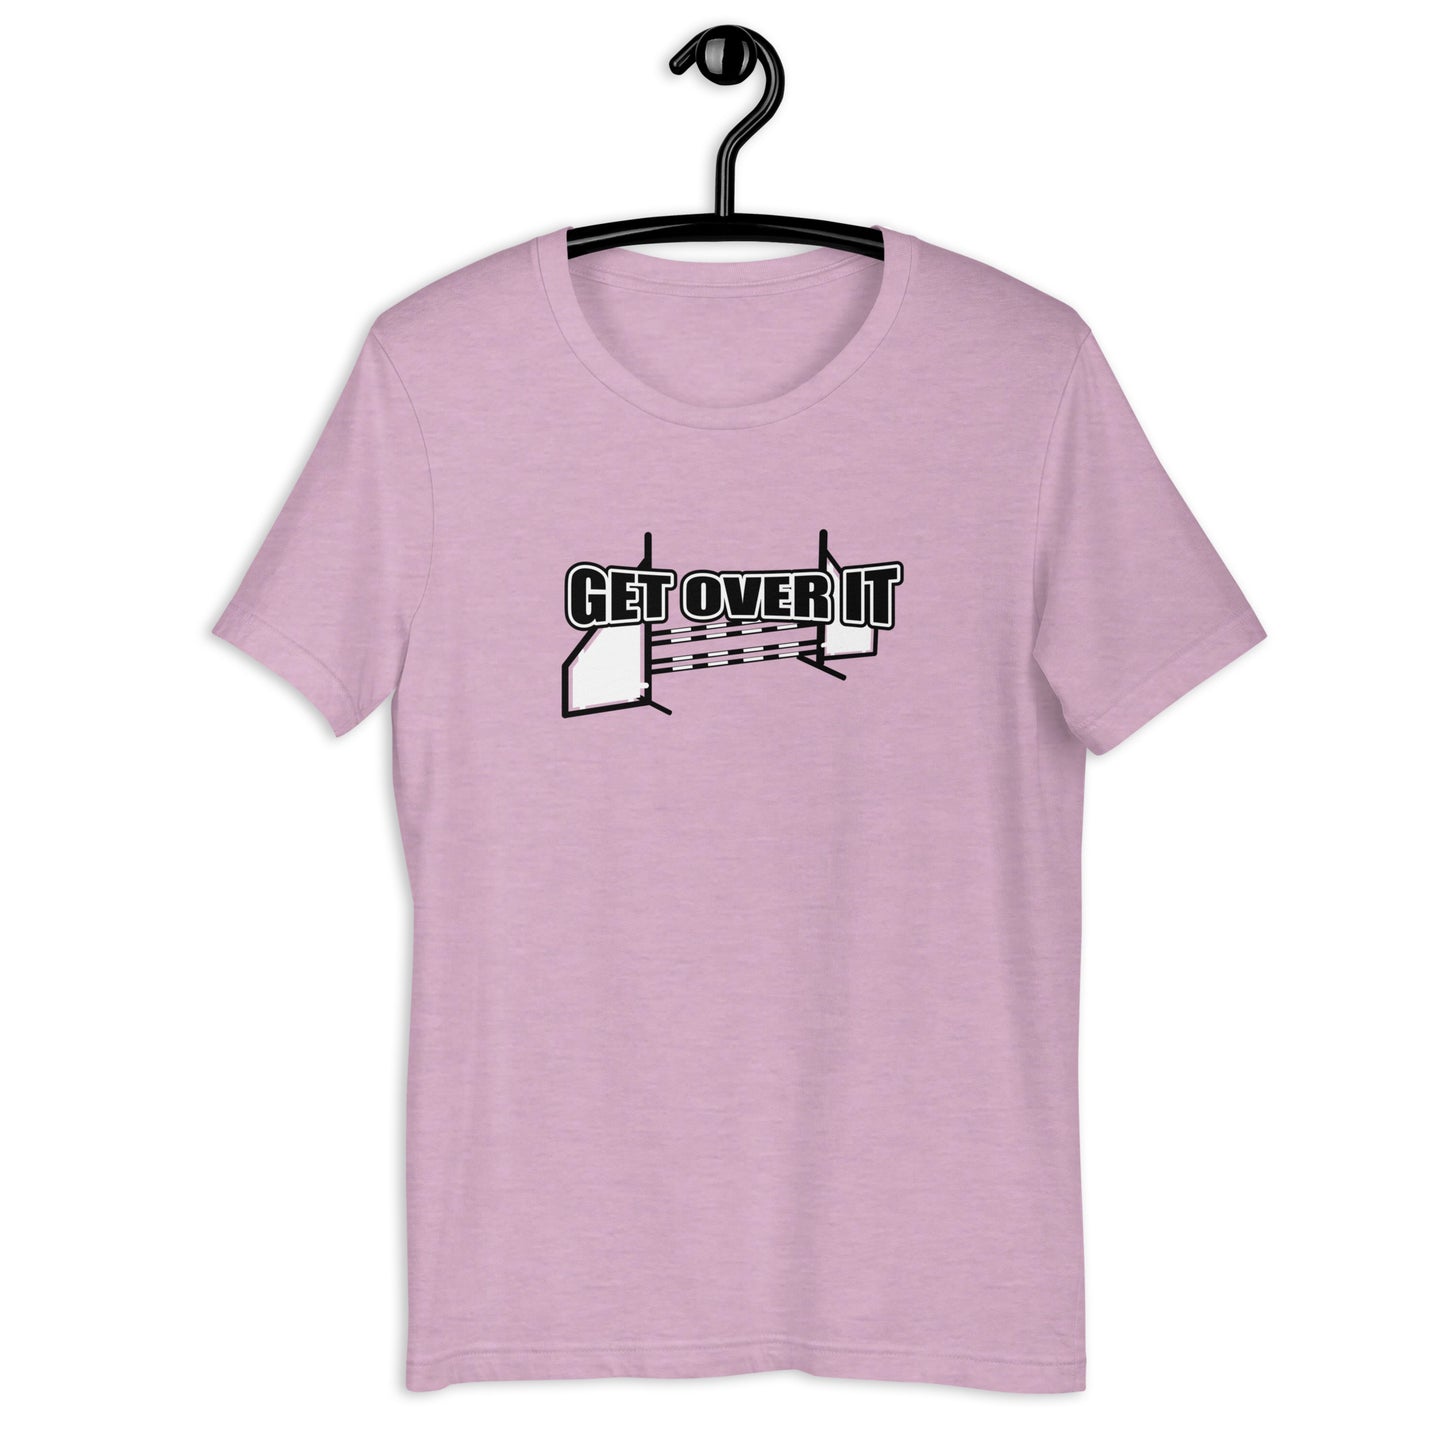 GET OVER IT - AGILITY Unisex t-shirt